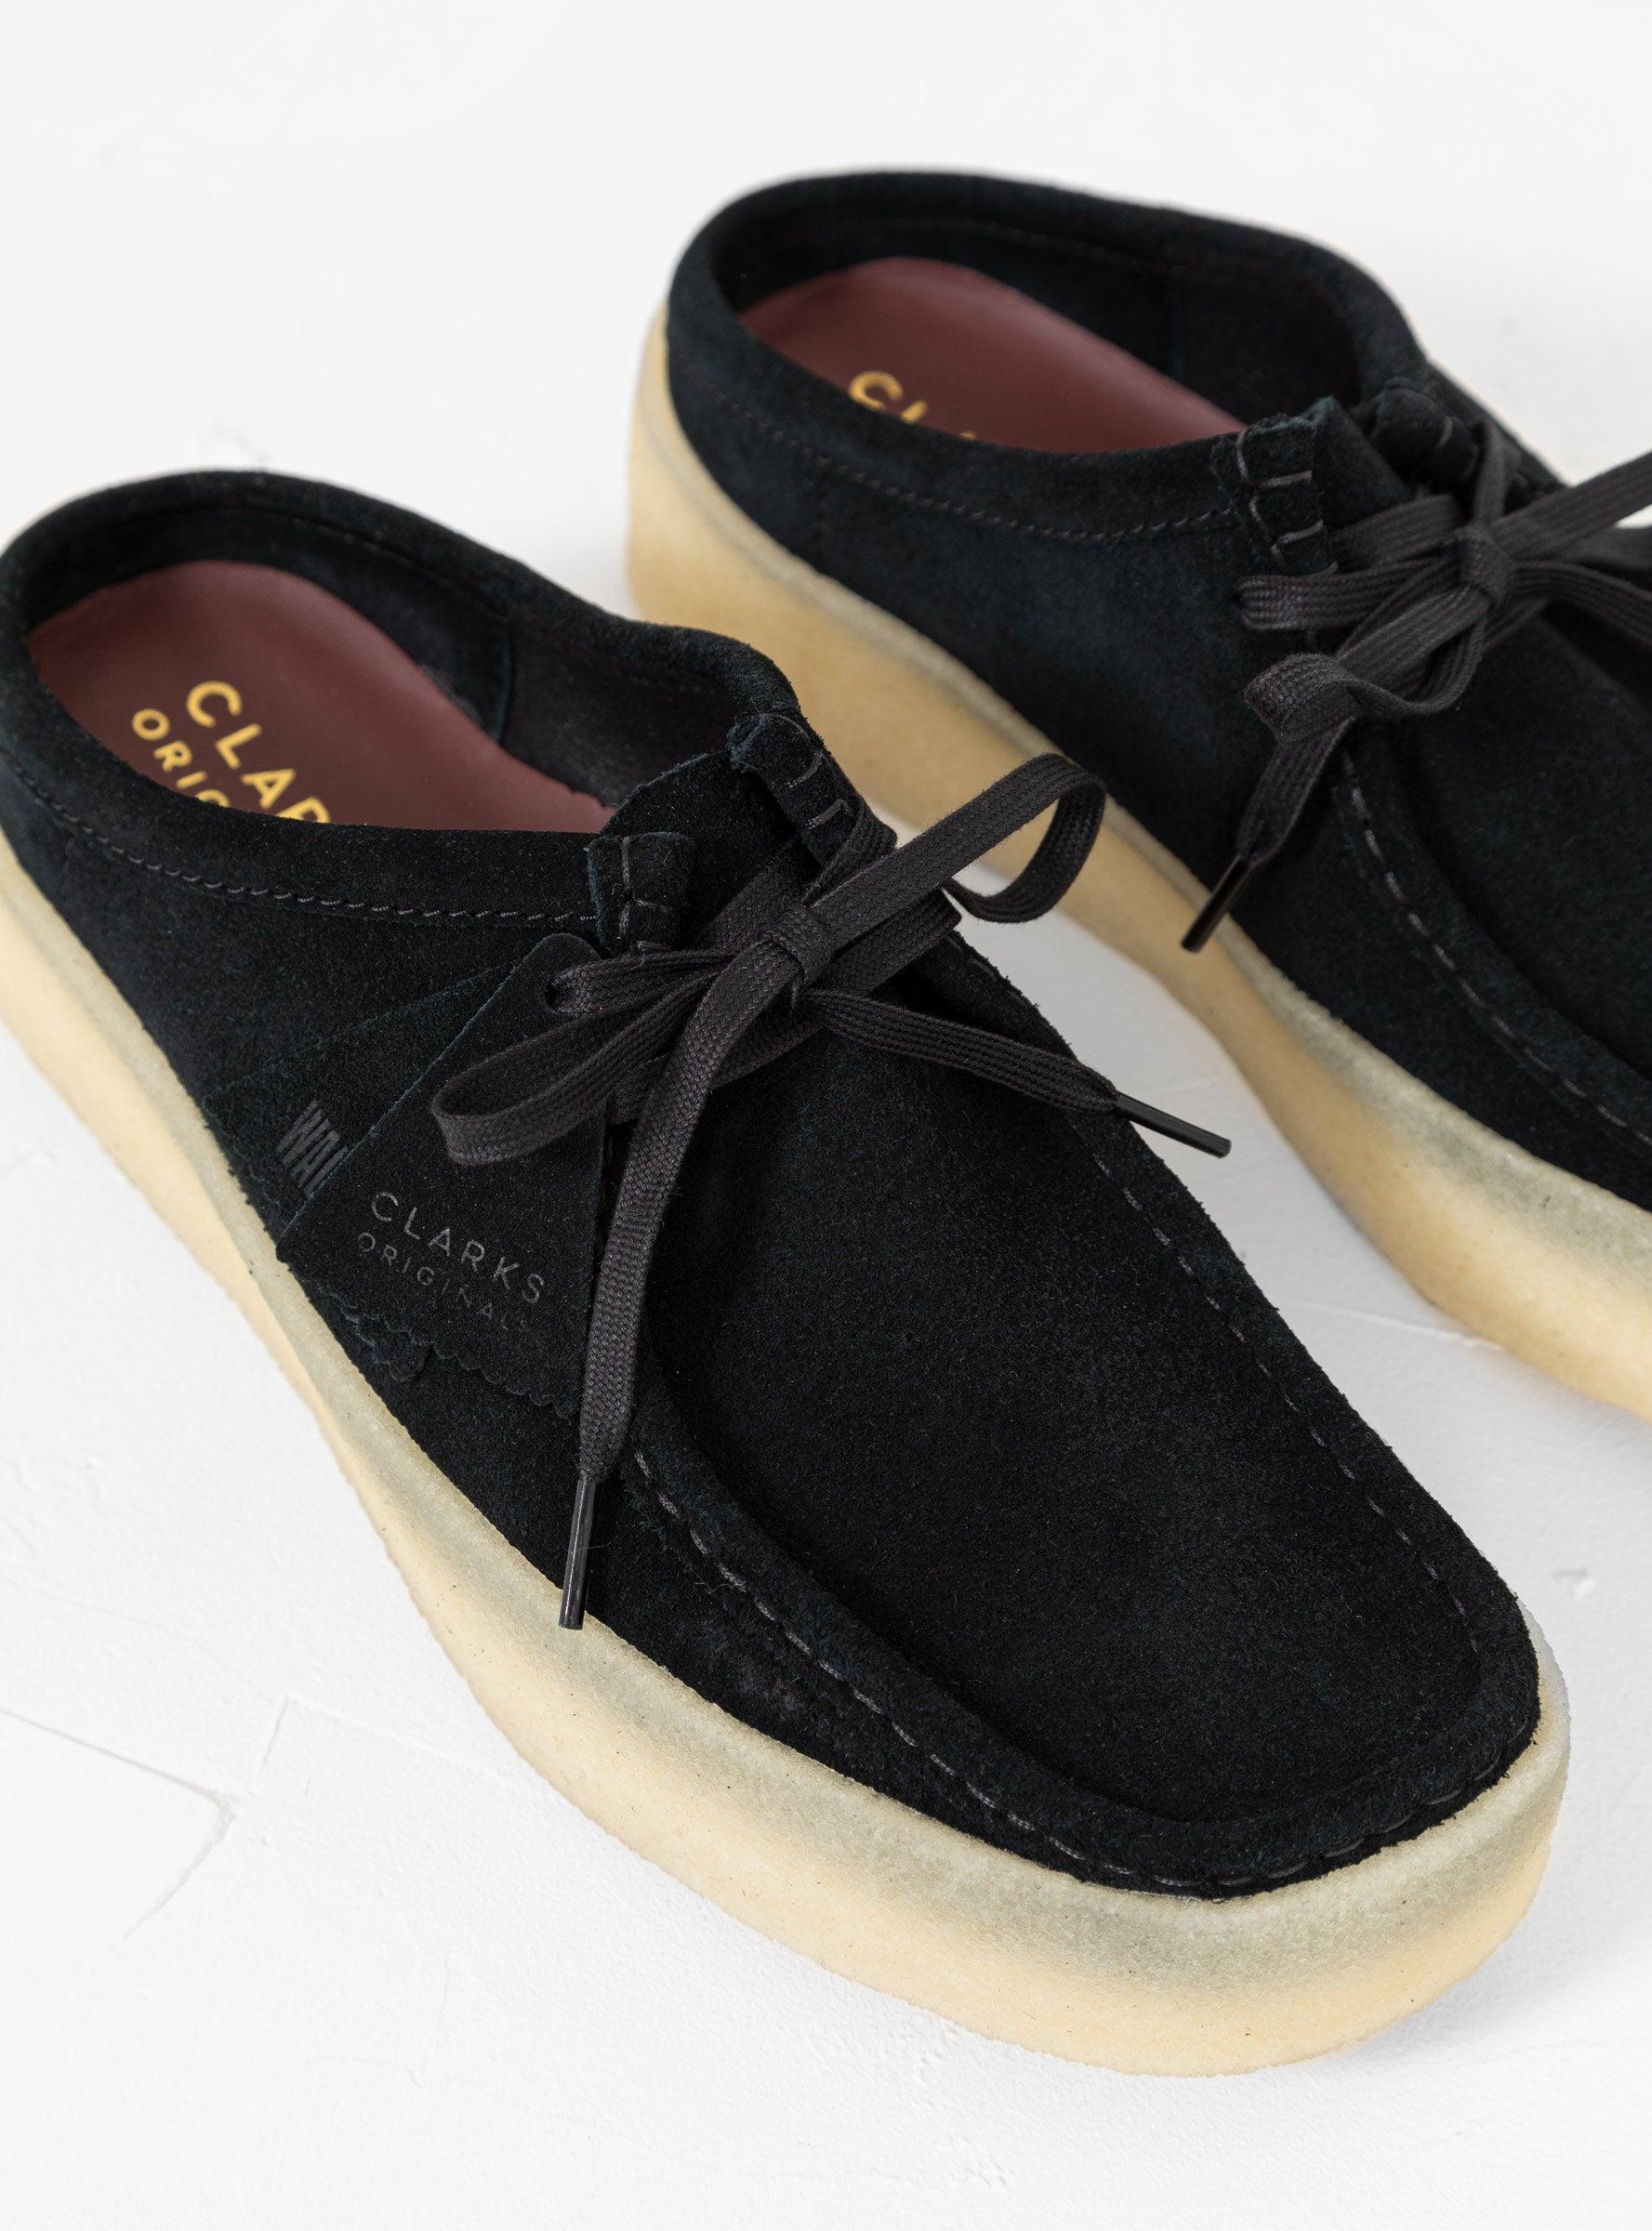 Clarks Wallabee Cup Lo Mules Black Suede for Men | Lyst